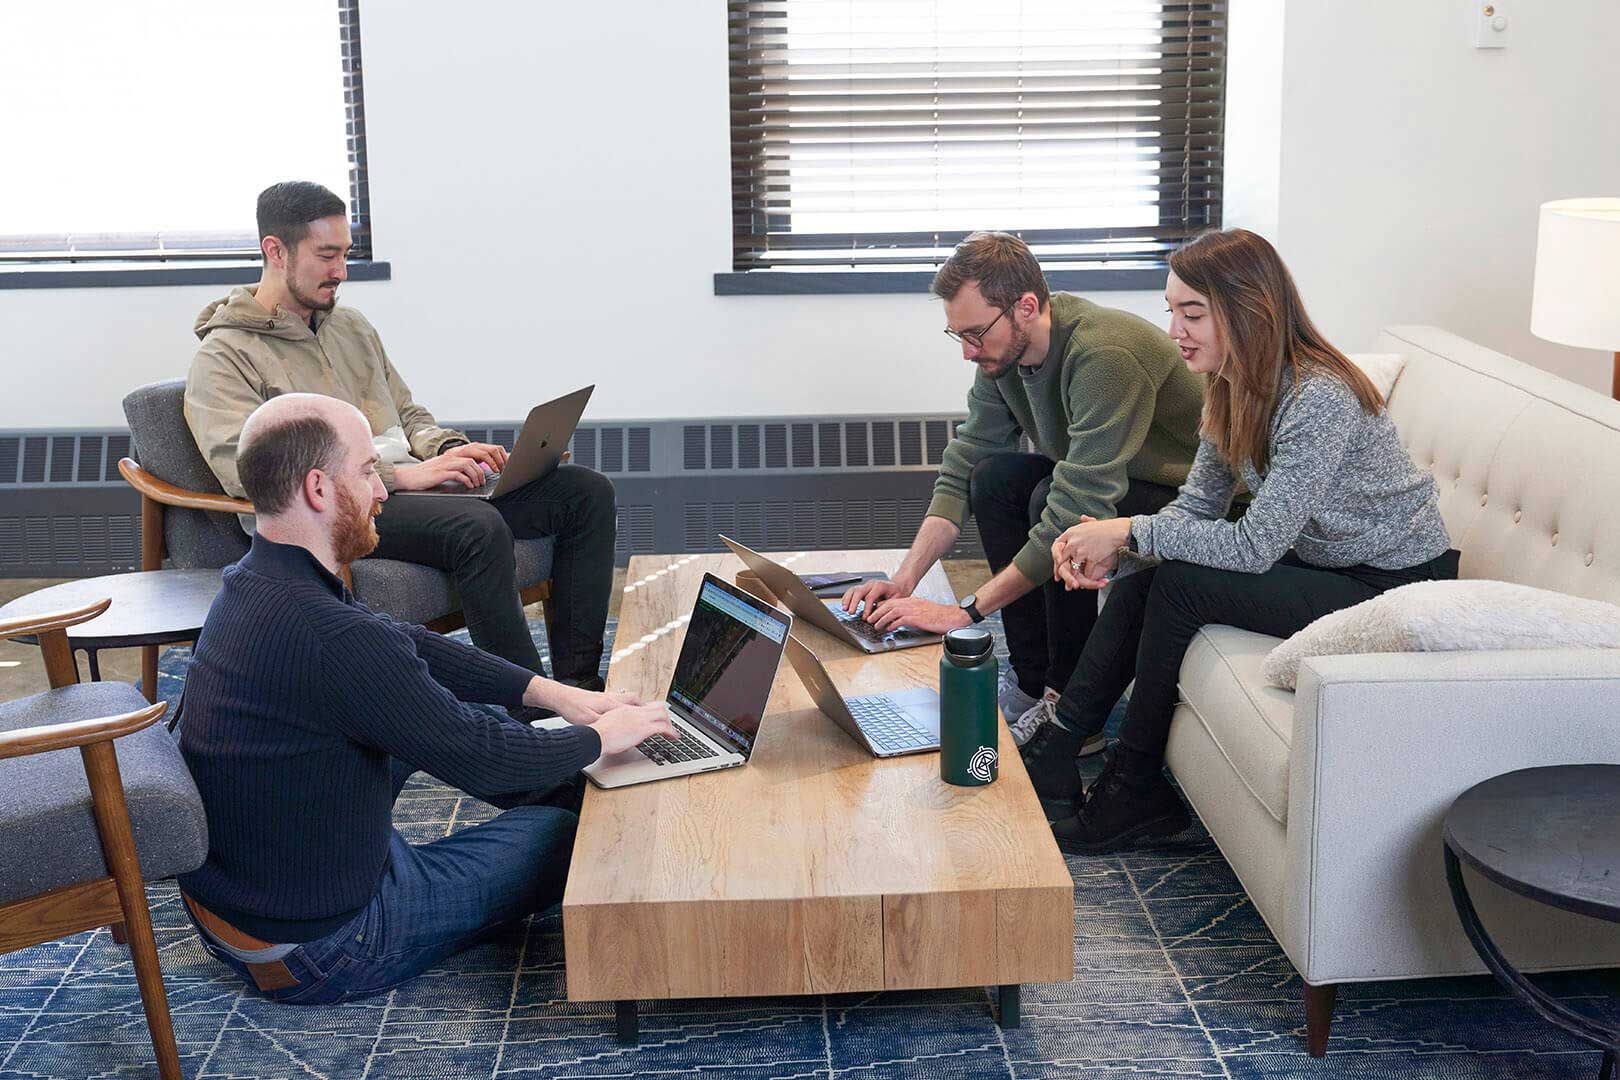 Hologrammers sit around a coffee table in the office and work together